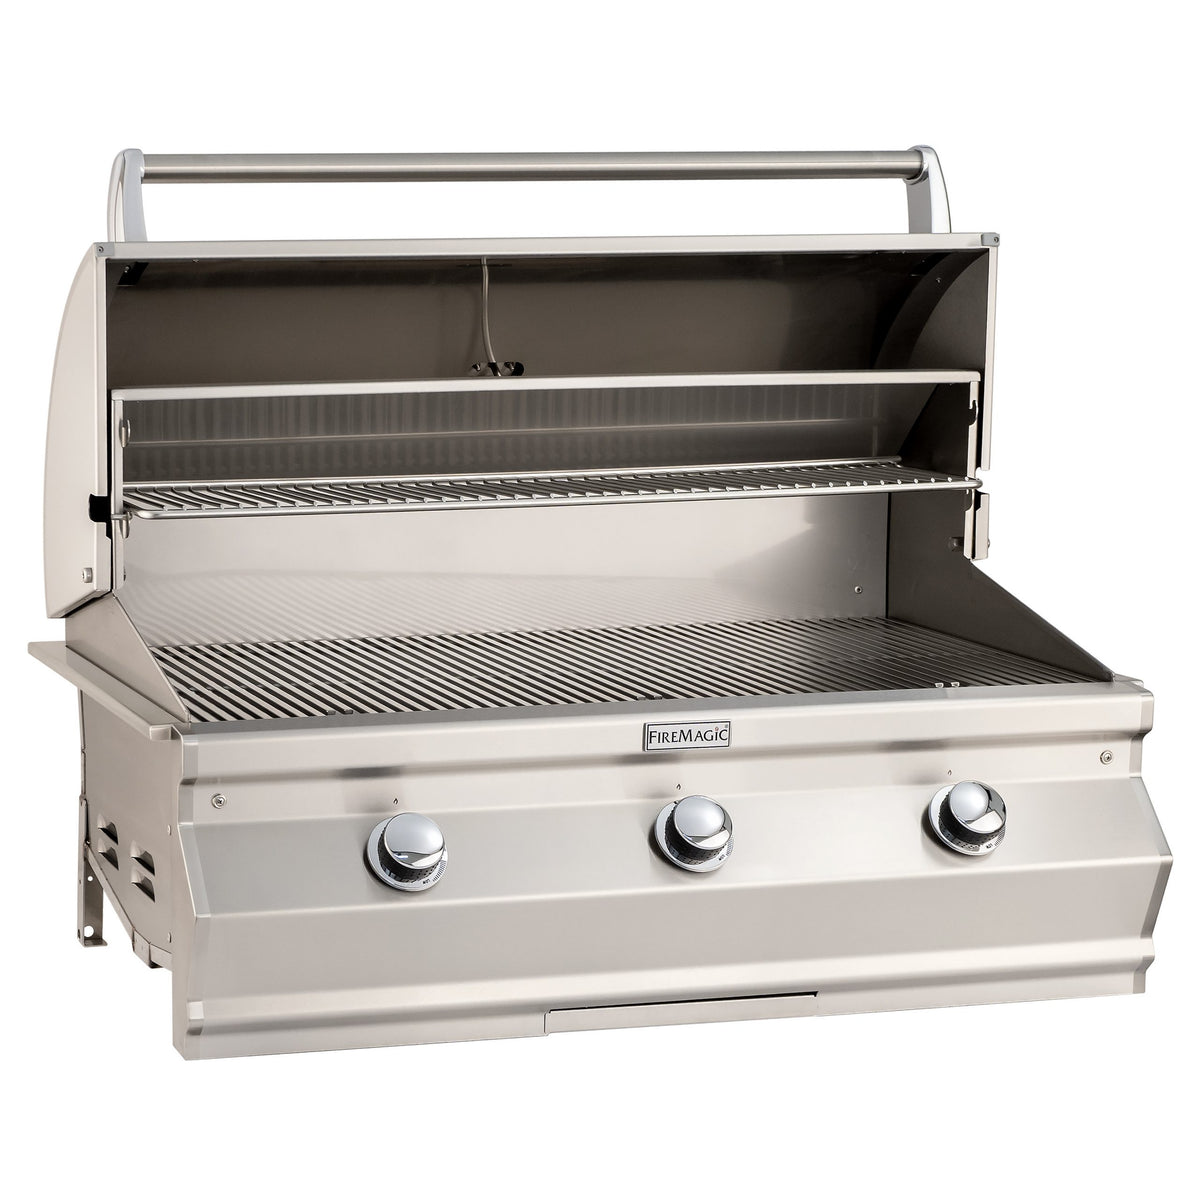 Fire Magic Choice Built-In Grills with Analog Thermometer